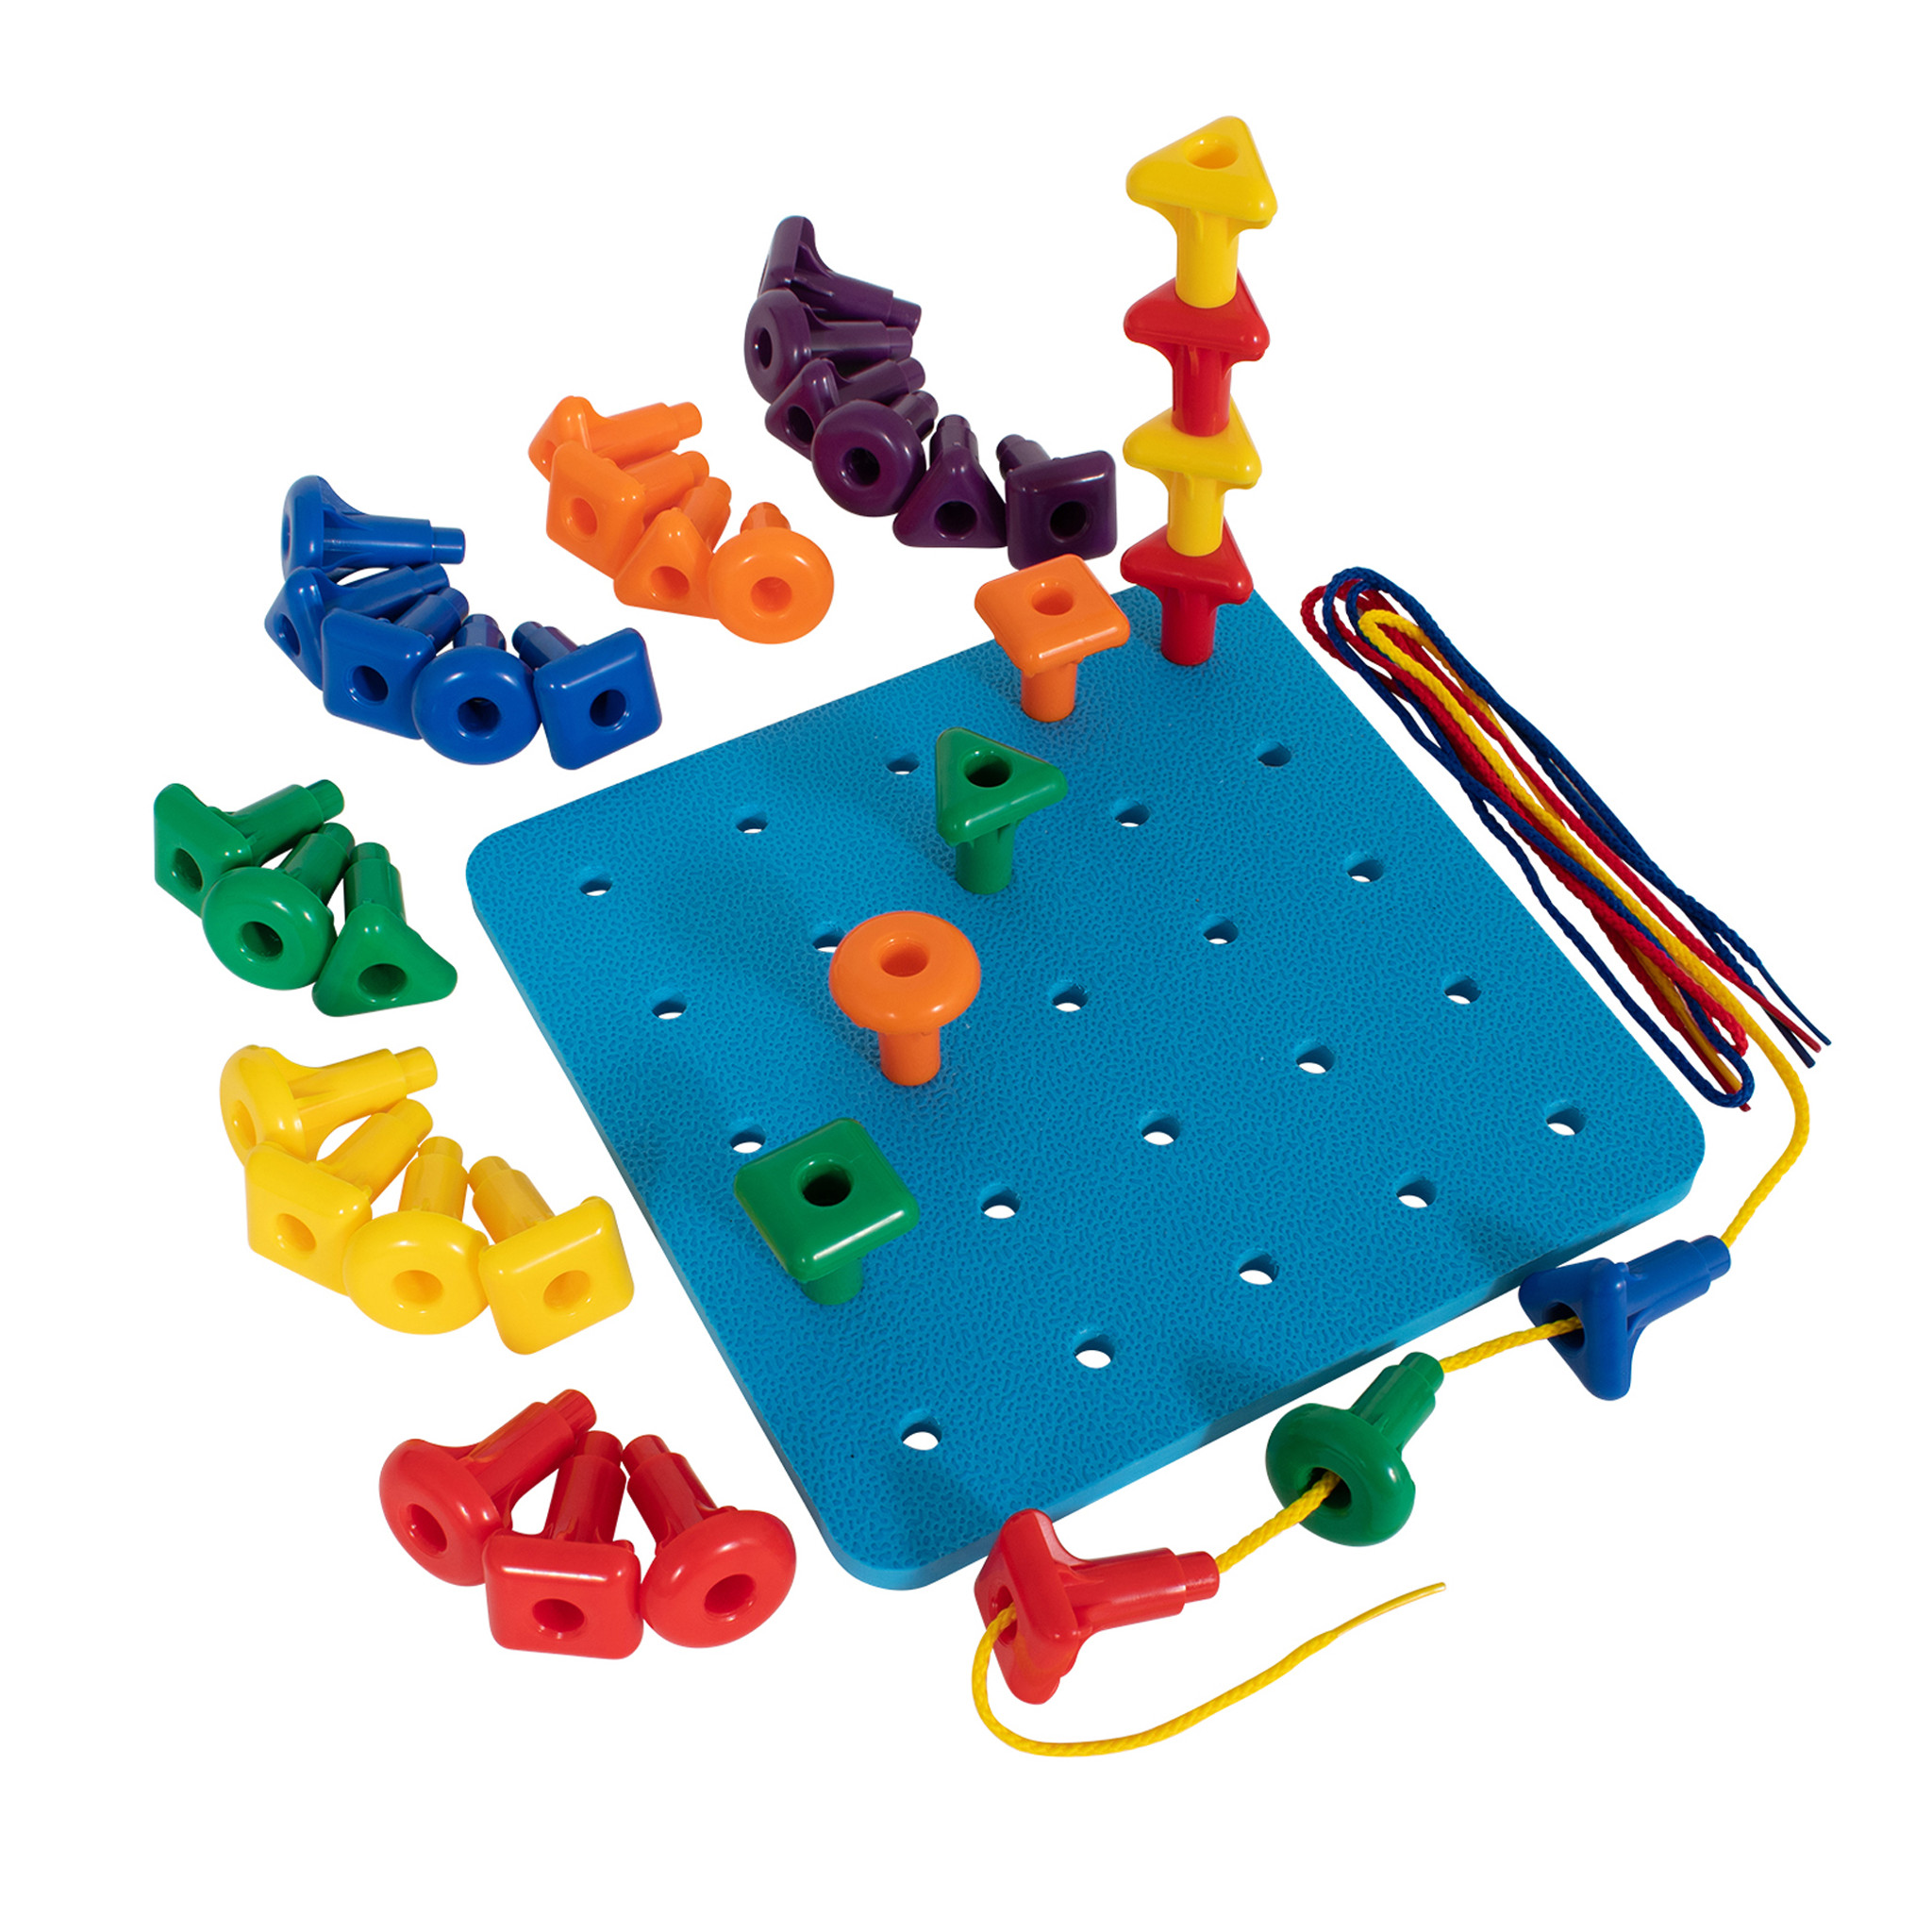 GIANT PEGBOARD Learning Activity Set